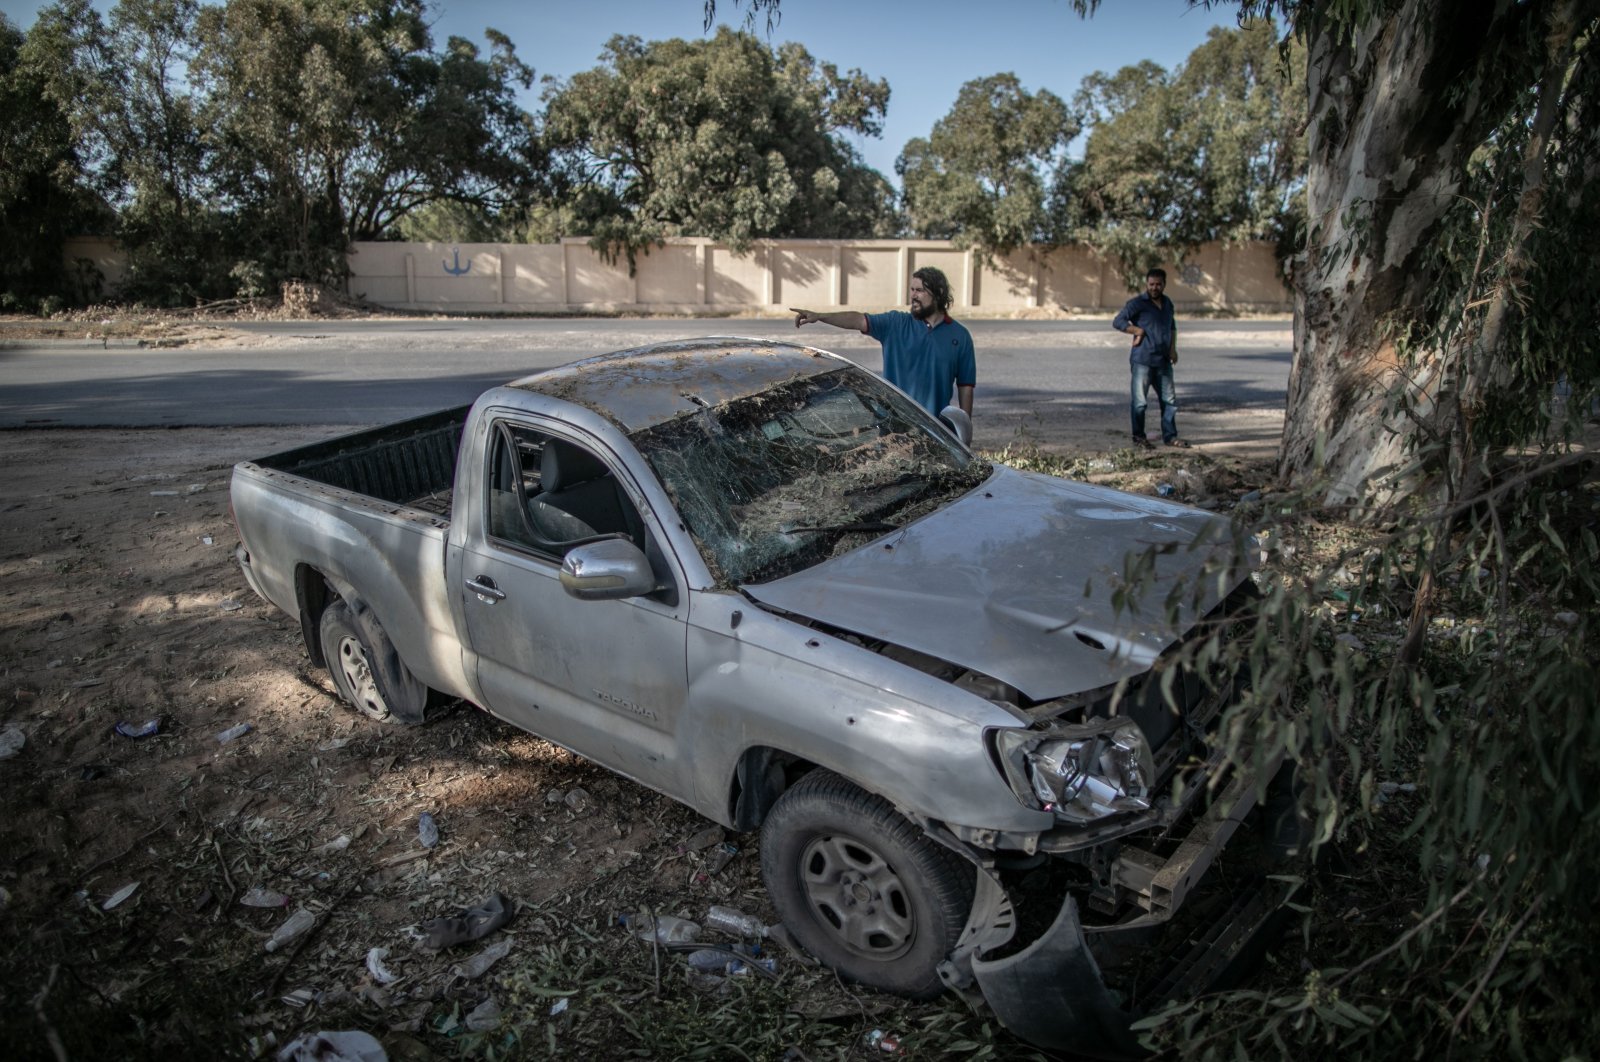 Since April 2019, the U.N.-backed Government of National Accord (GNA) has been under attack by Haftar's forces, based in eastern Libya, and more than 1,000 people have been killed in the violence. (AA)